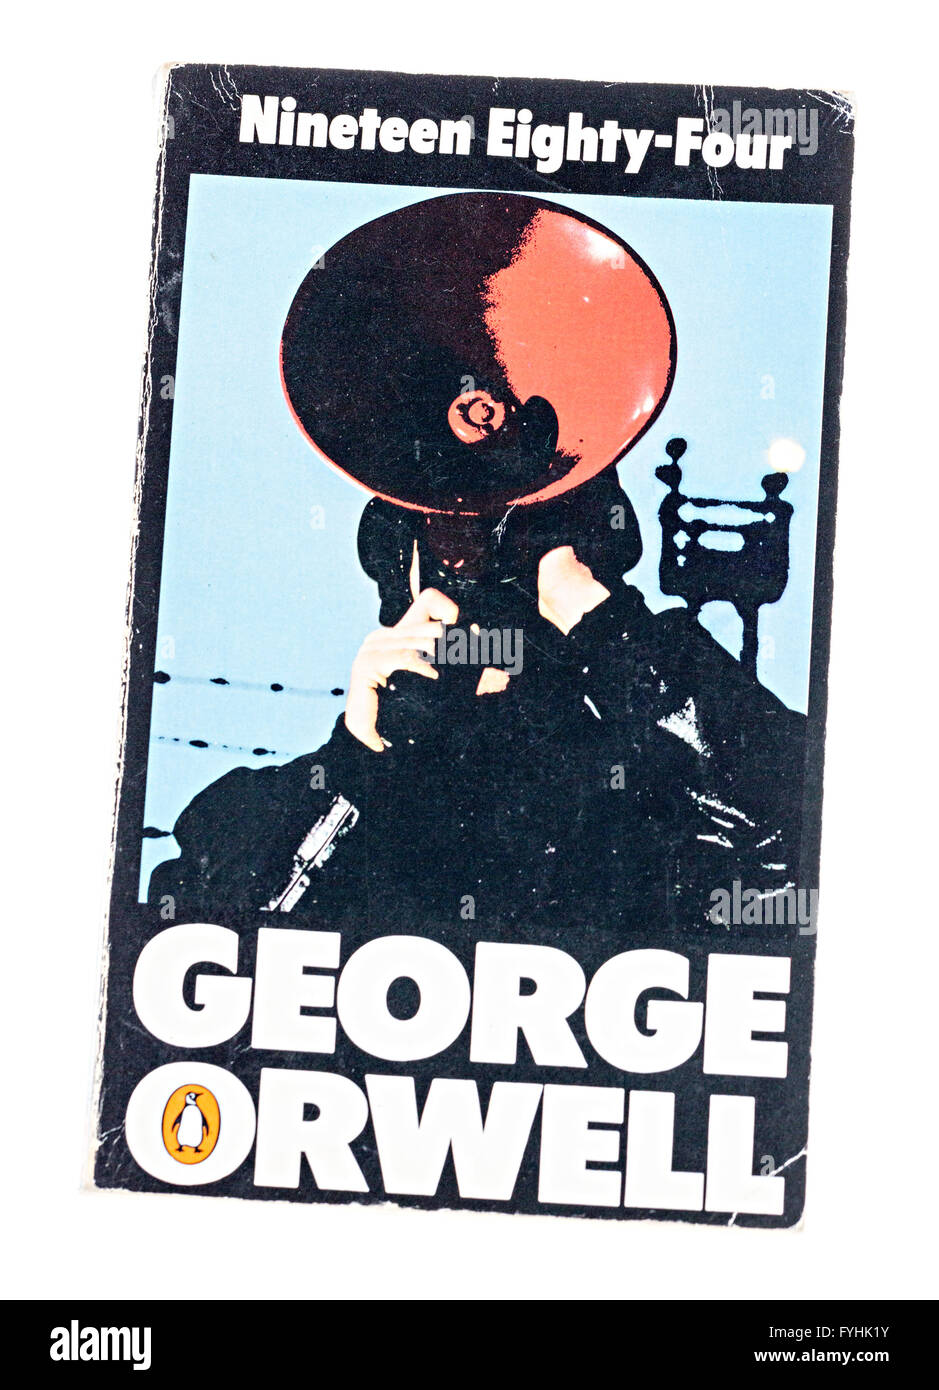 George Orwell Nineteen Eighty Four paperback book published by Penguin Stock Photo